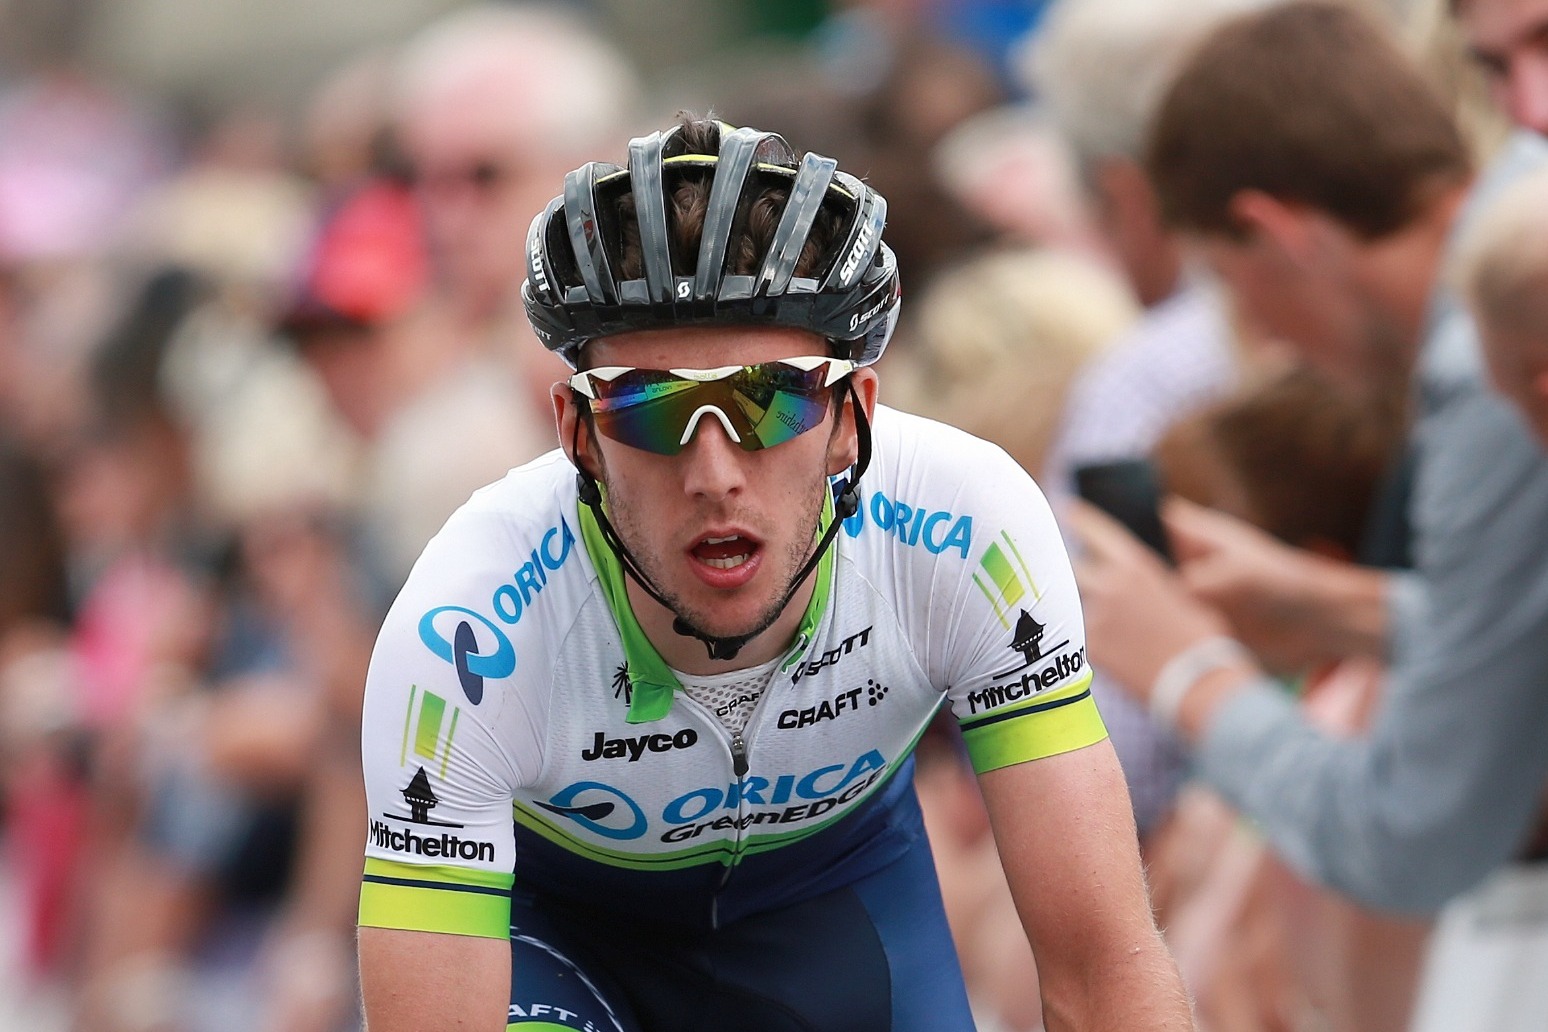 Simon Yates withdraws from La Vuelta a Espana after positive Covid-19 test 